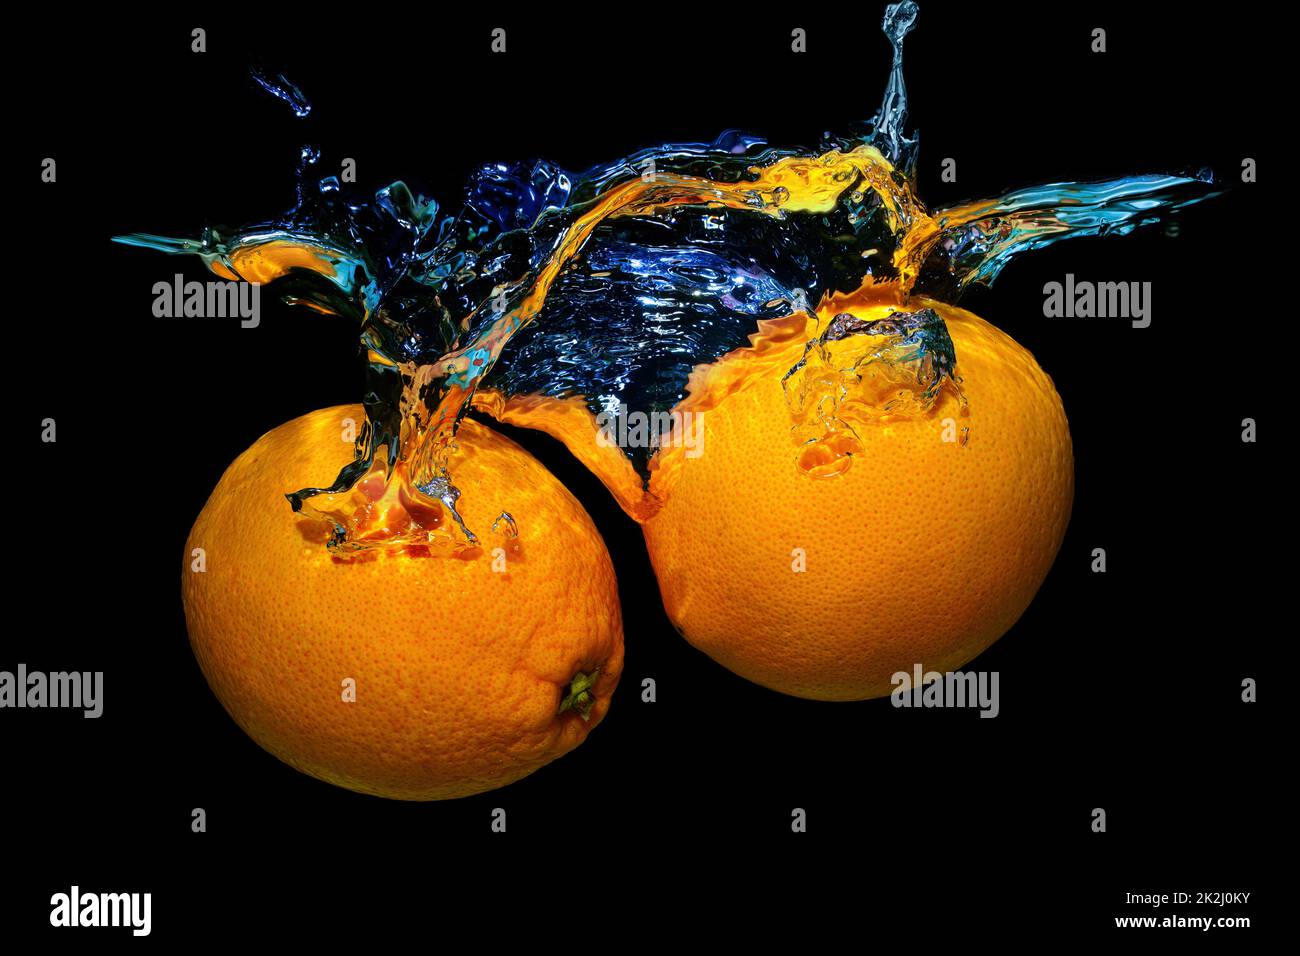 Two fresh oranges in water splashes isolated on black background. Stock Photo